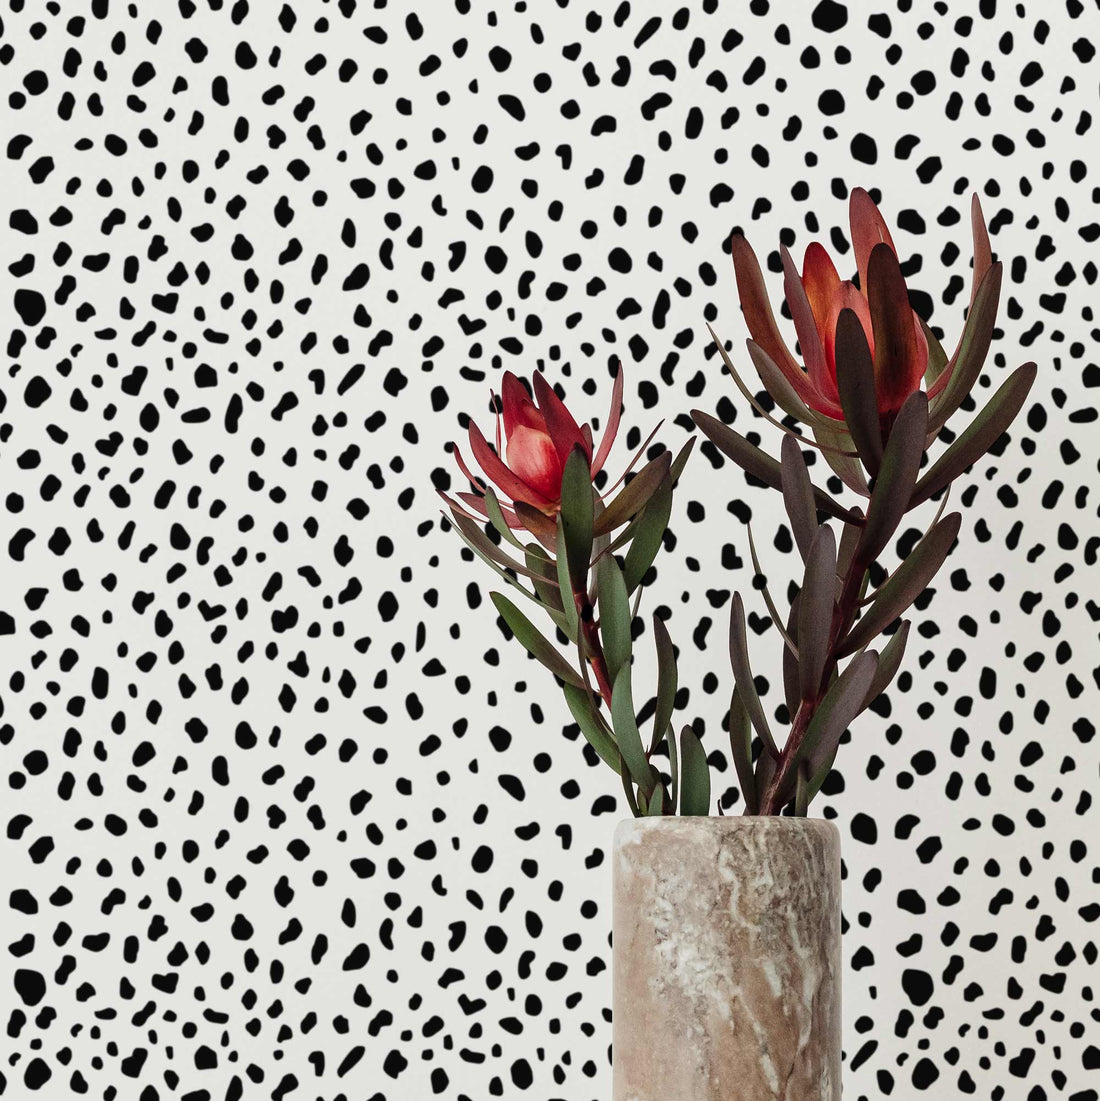 small black and white dot pattern wallpaper animal style